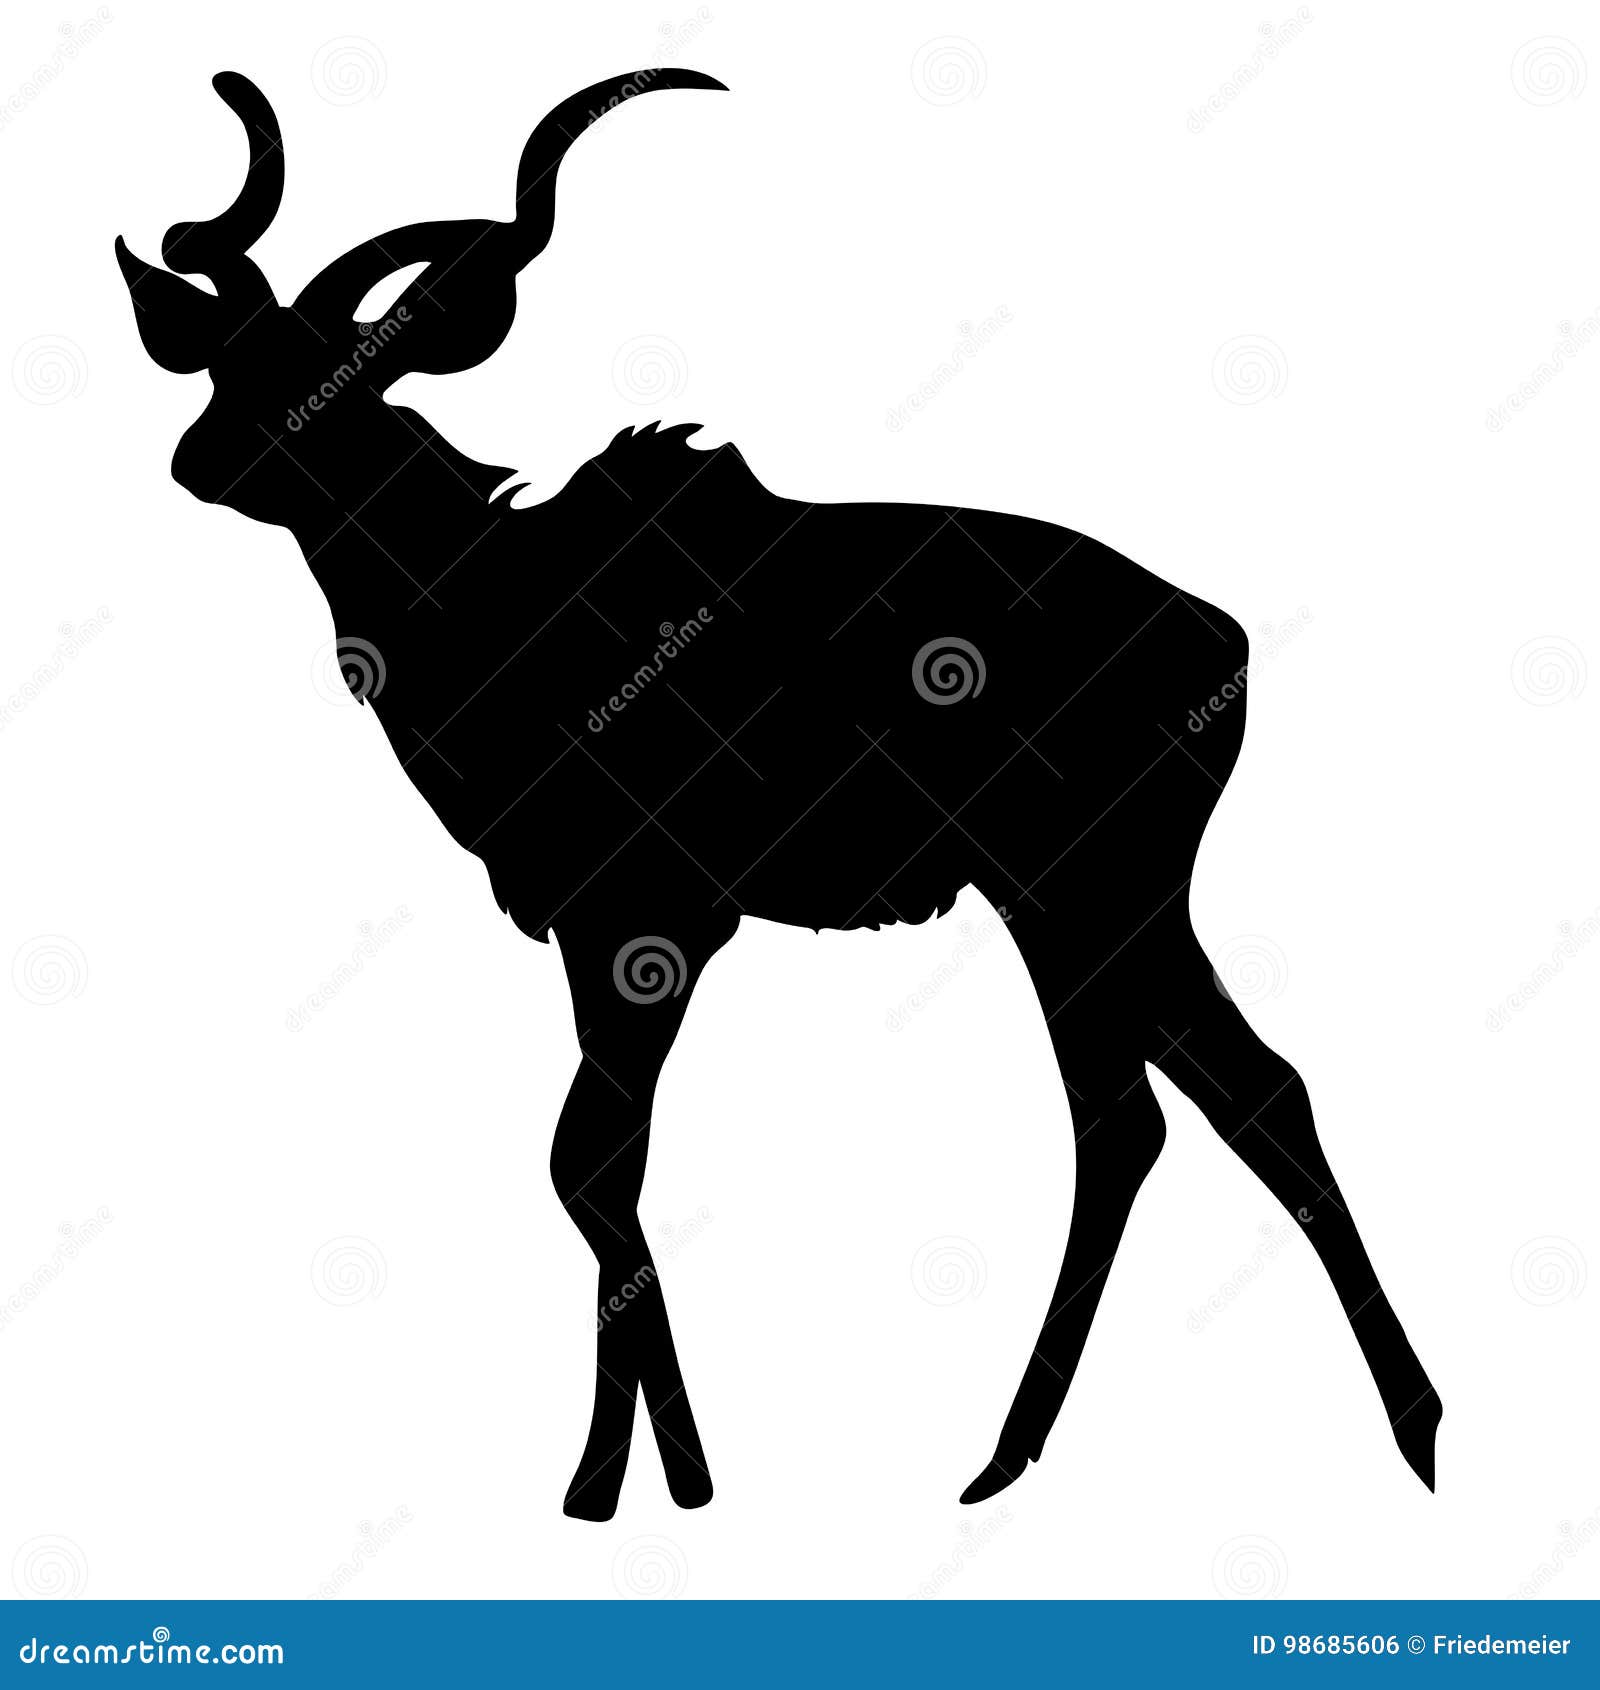 view on the silhouette of a greater kudu